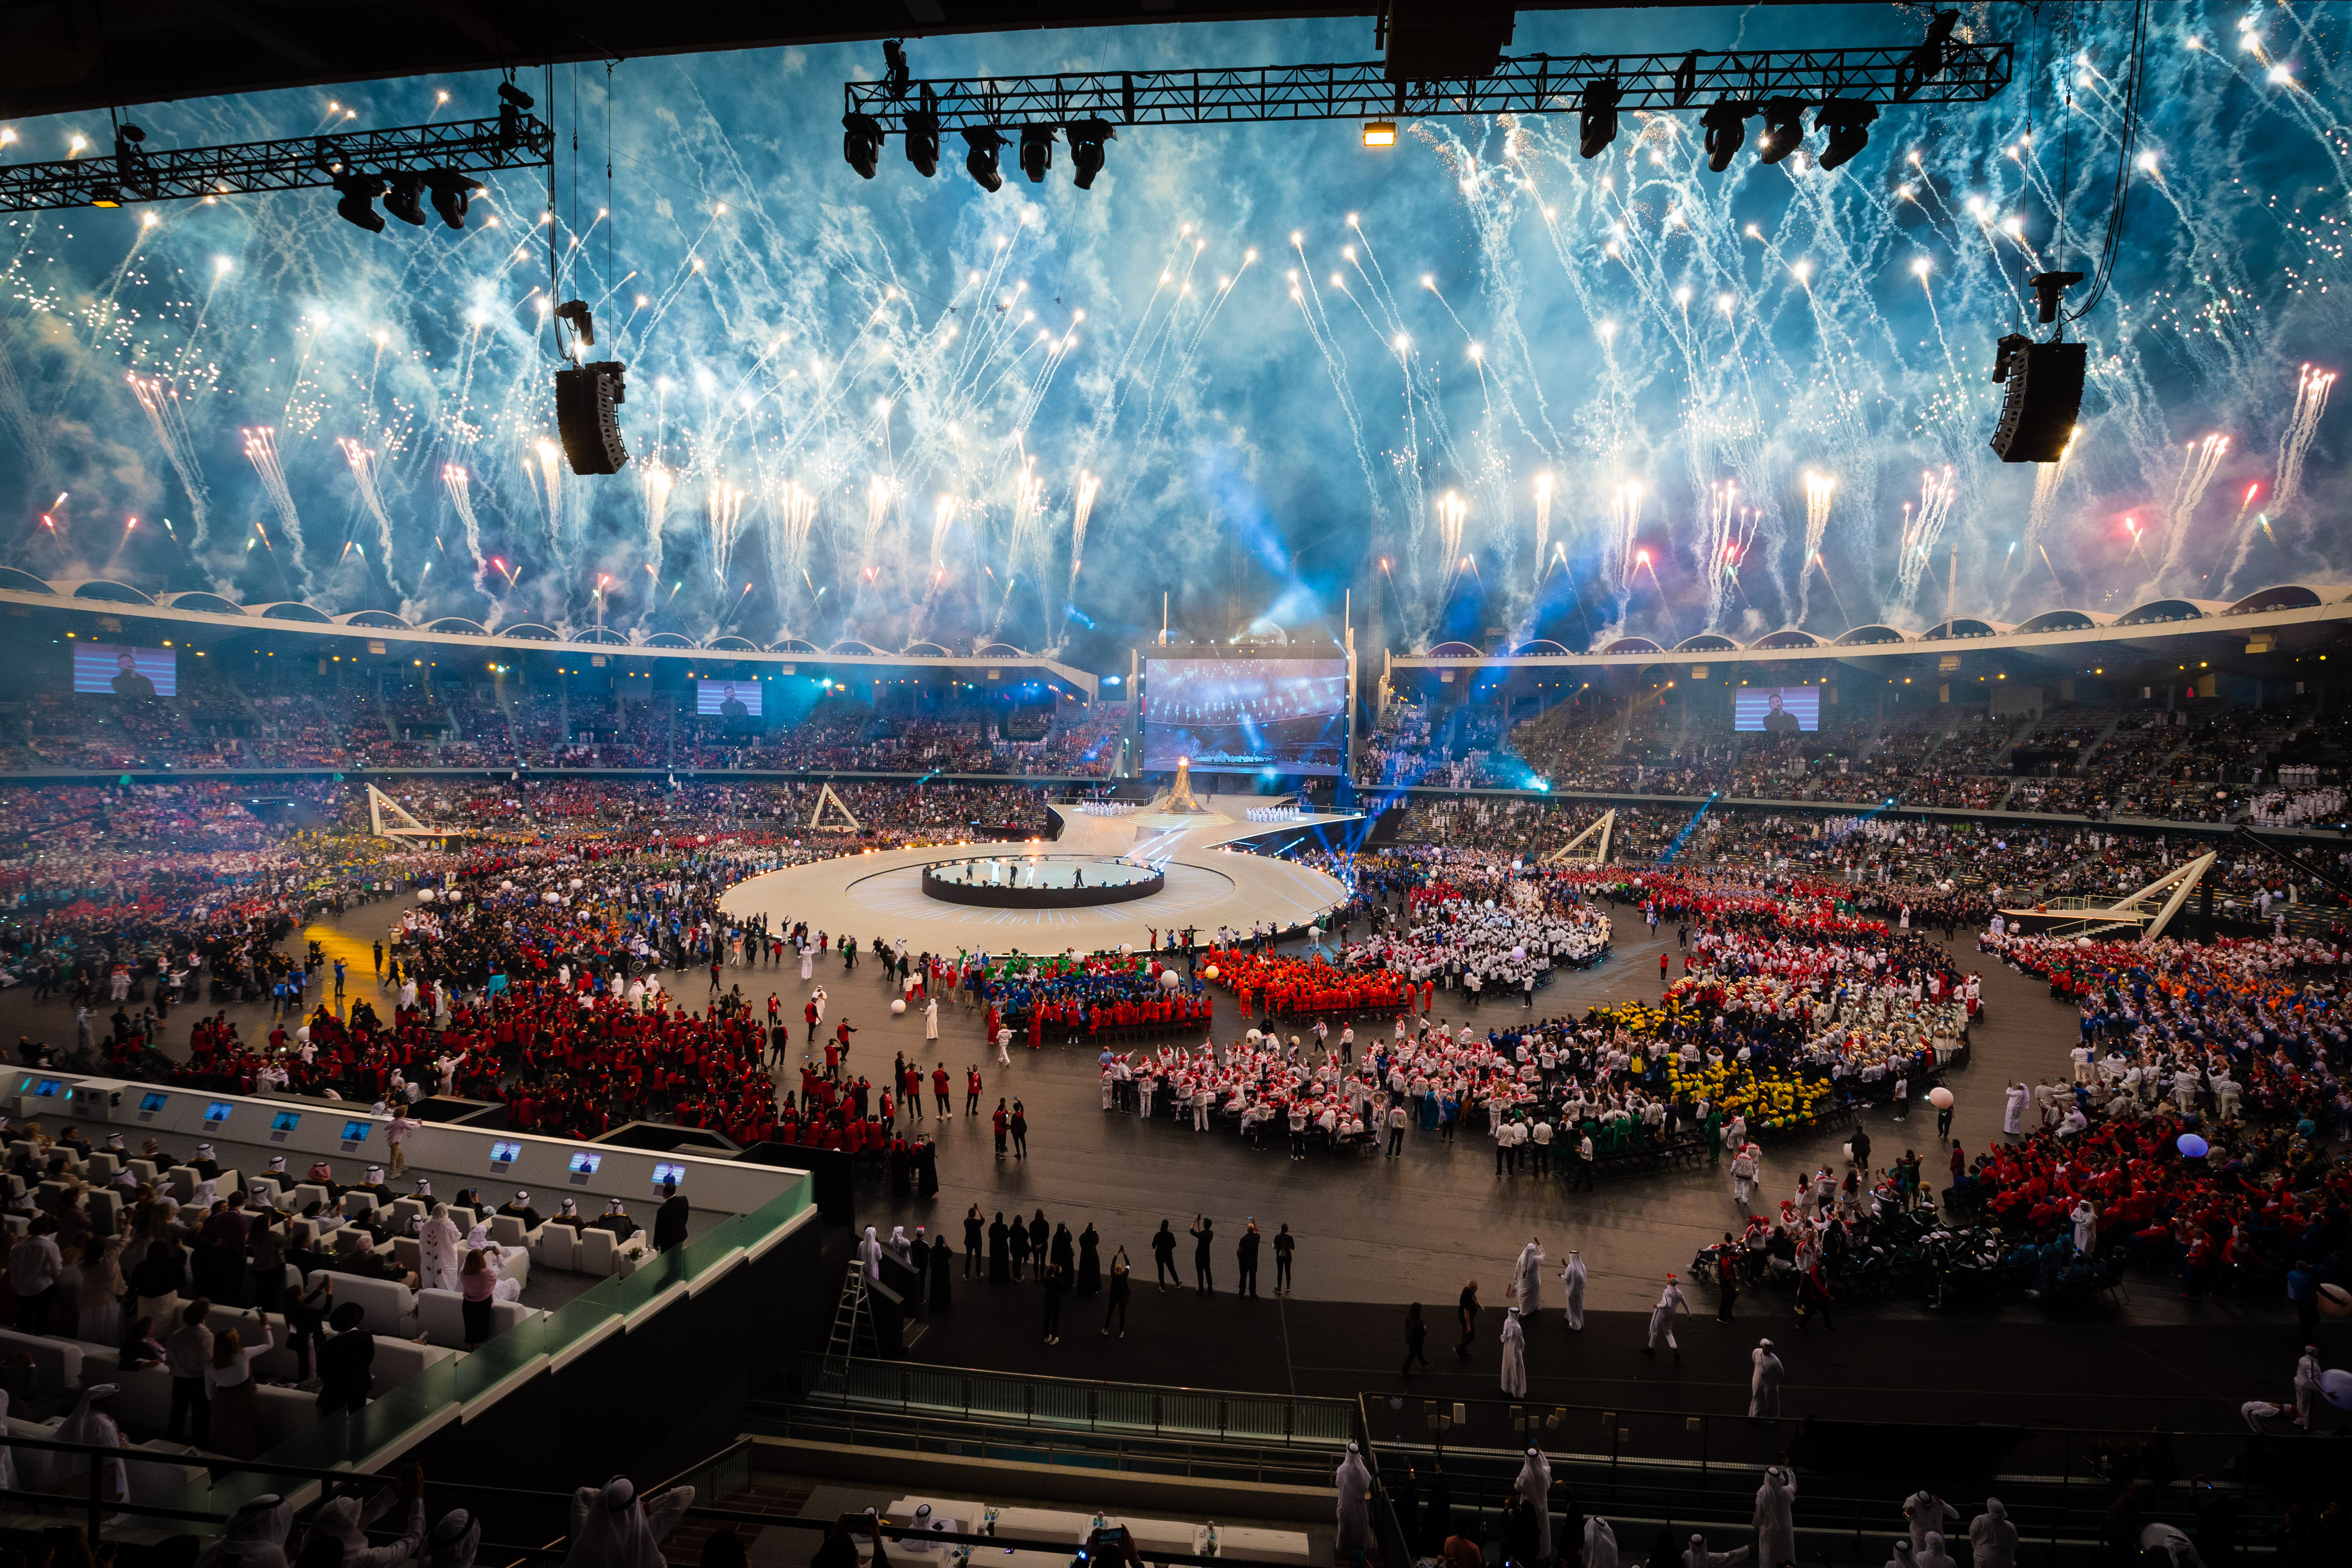 2019 Special Olympics World Games opening ceremony